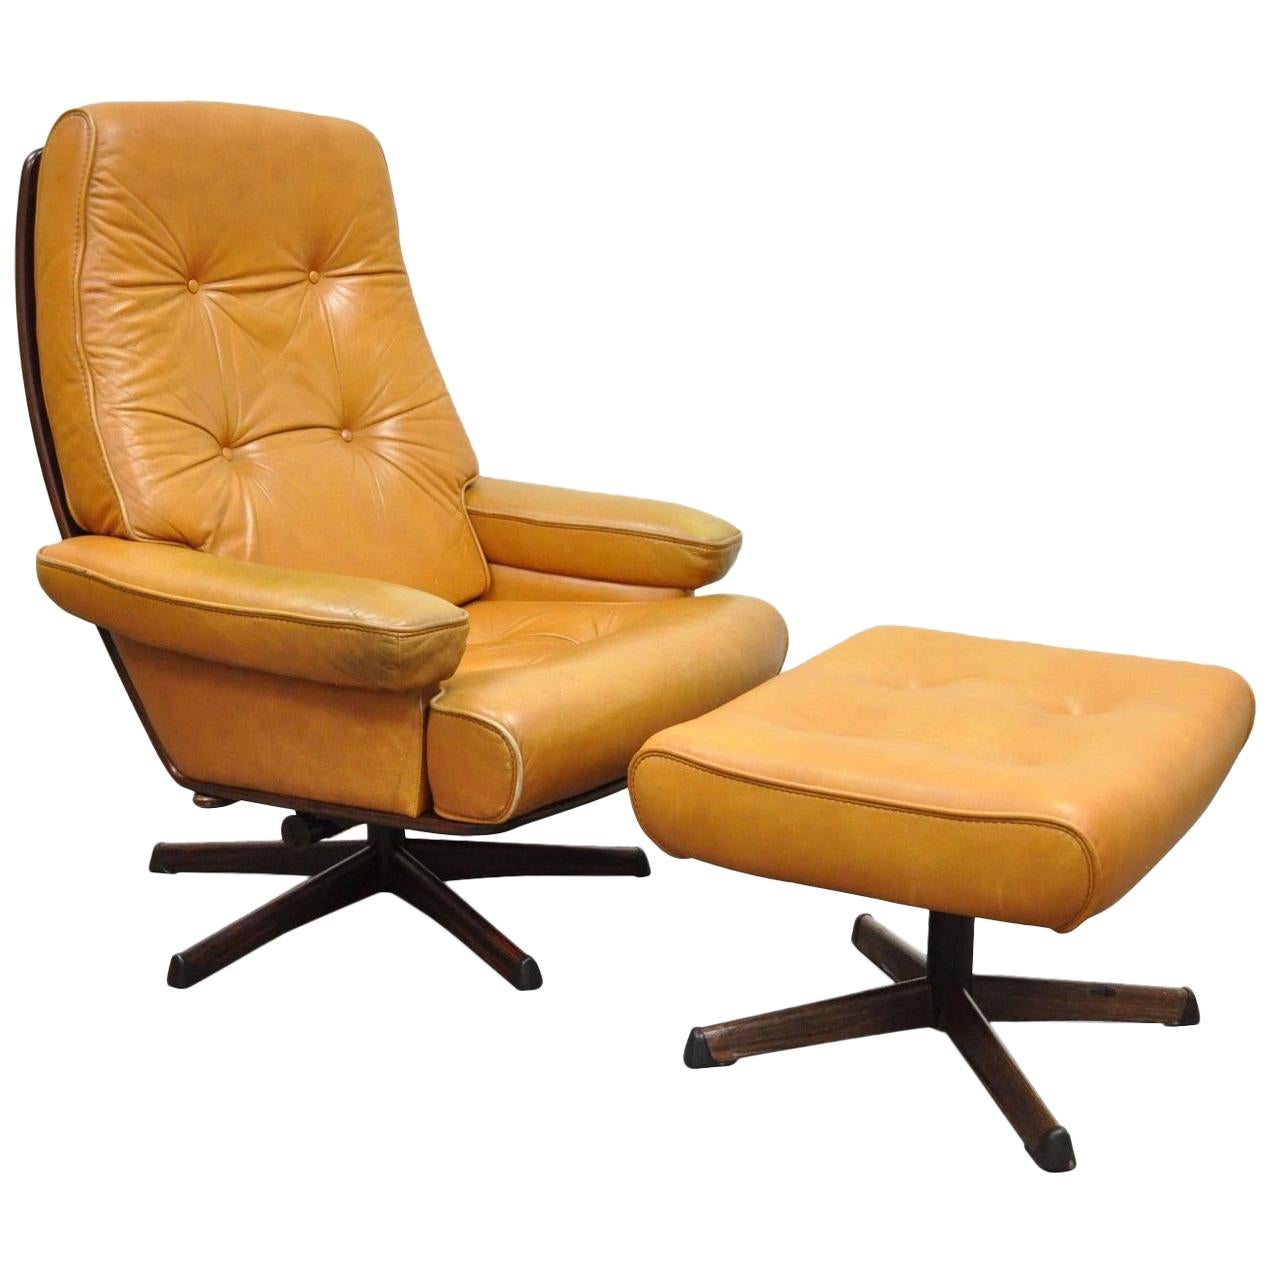 Gote Mobler Nassjo Mid-Century Modern Caramel Leather Lounge Chair and Ottoman